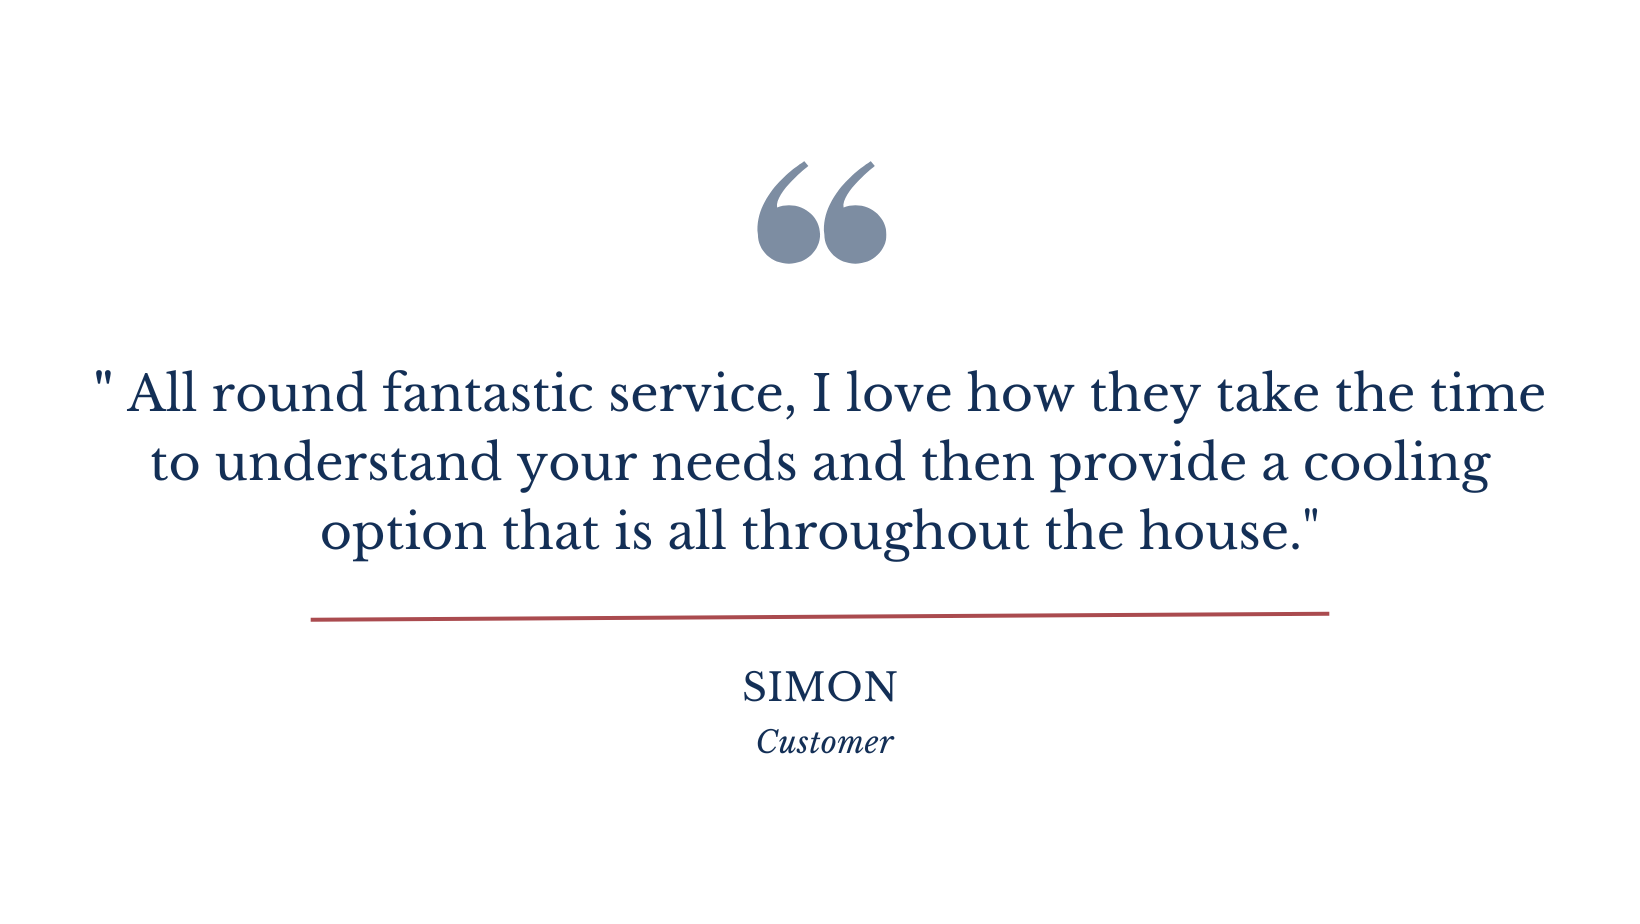 _All round fantastic service, I love how they take the time to understand your needs and then provide a cooling option that is all throughout the house. (1).png